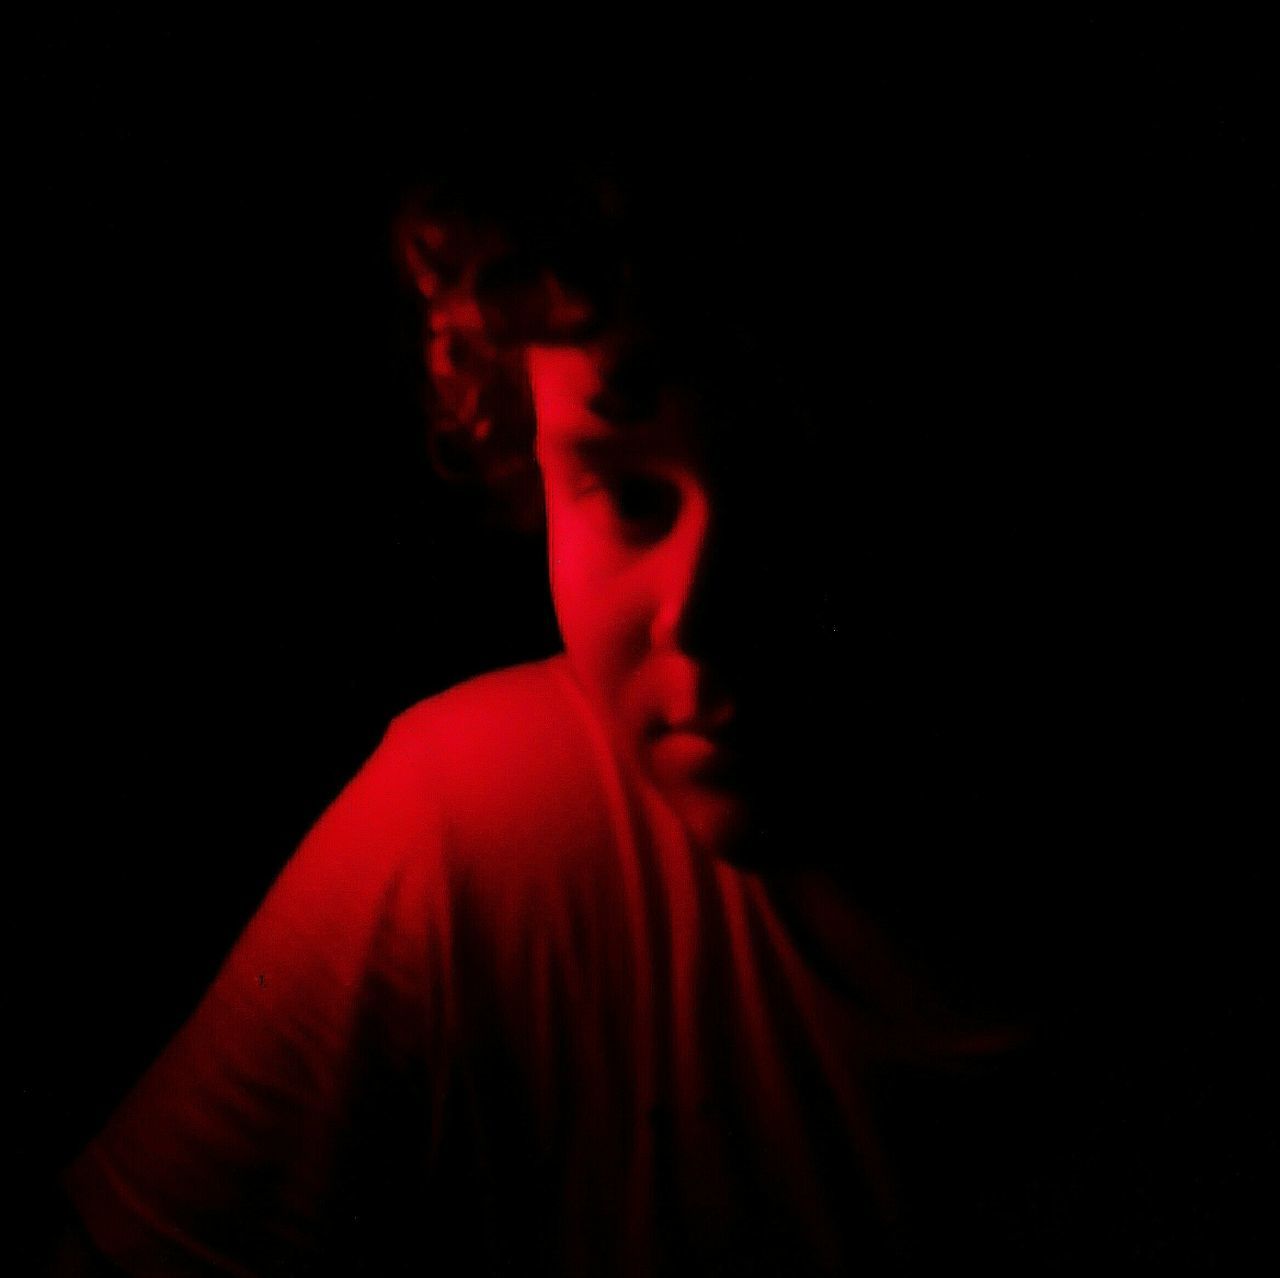 black background, studio shot, indoors, one person, red, headshot, portrait, copy space, close-up, front view, looking, dark, domestic room, young adult, looking away, light - natural phenomenon, cut out, lifestyles, contemplation, human face